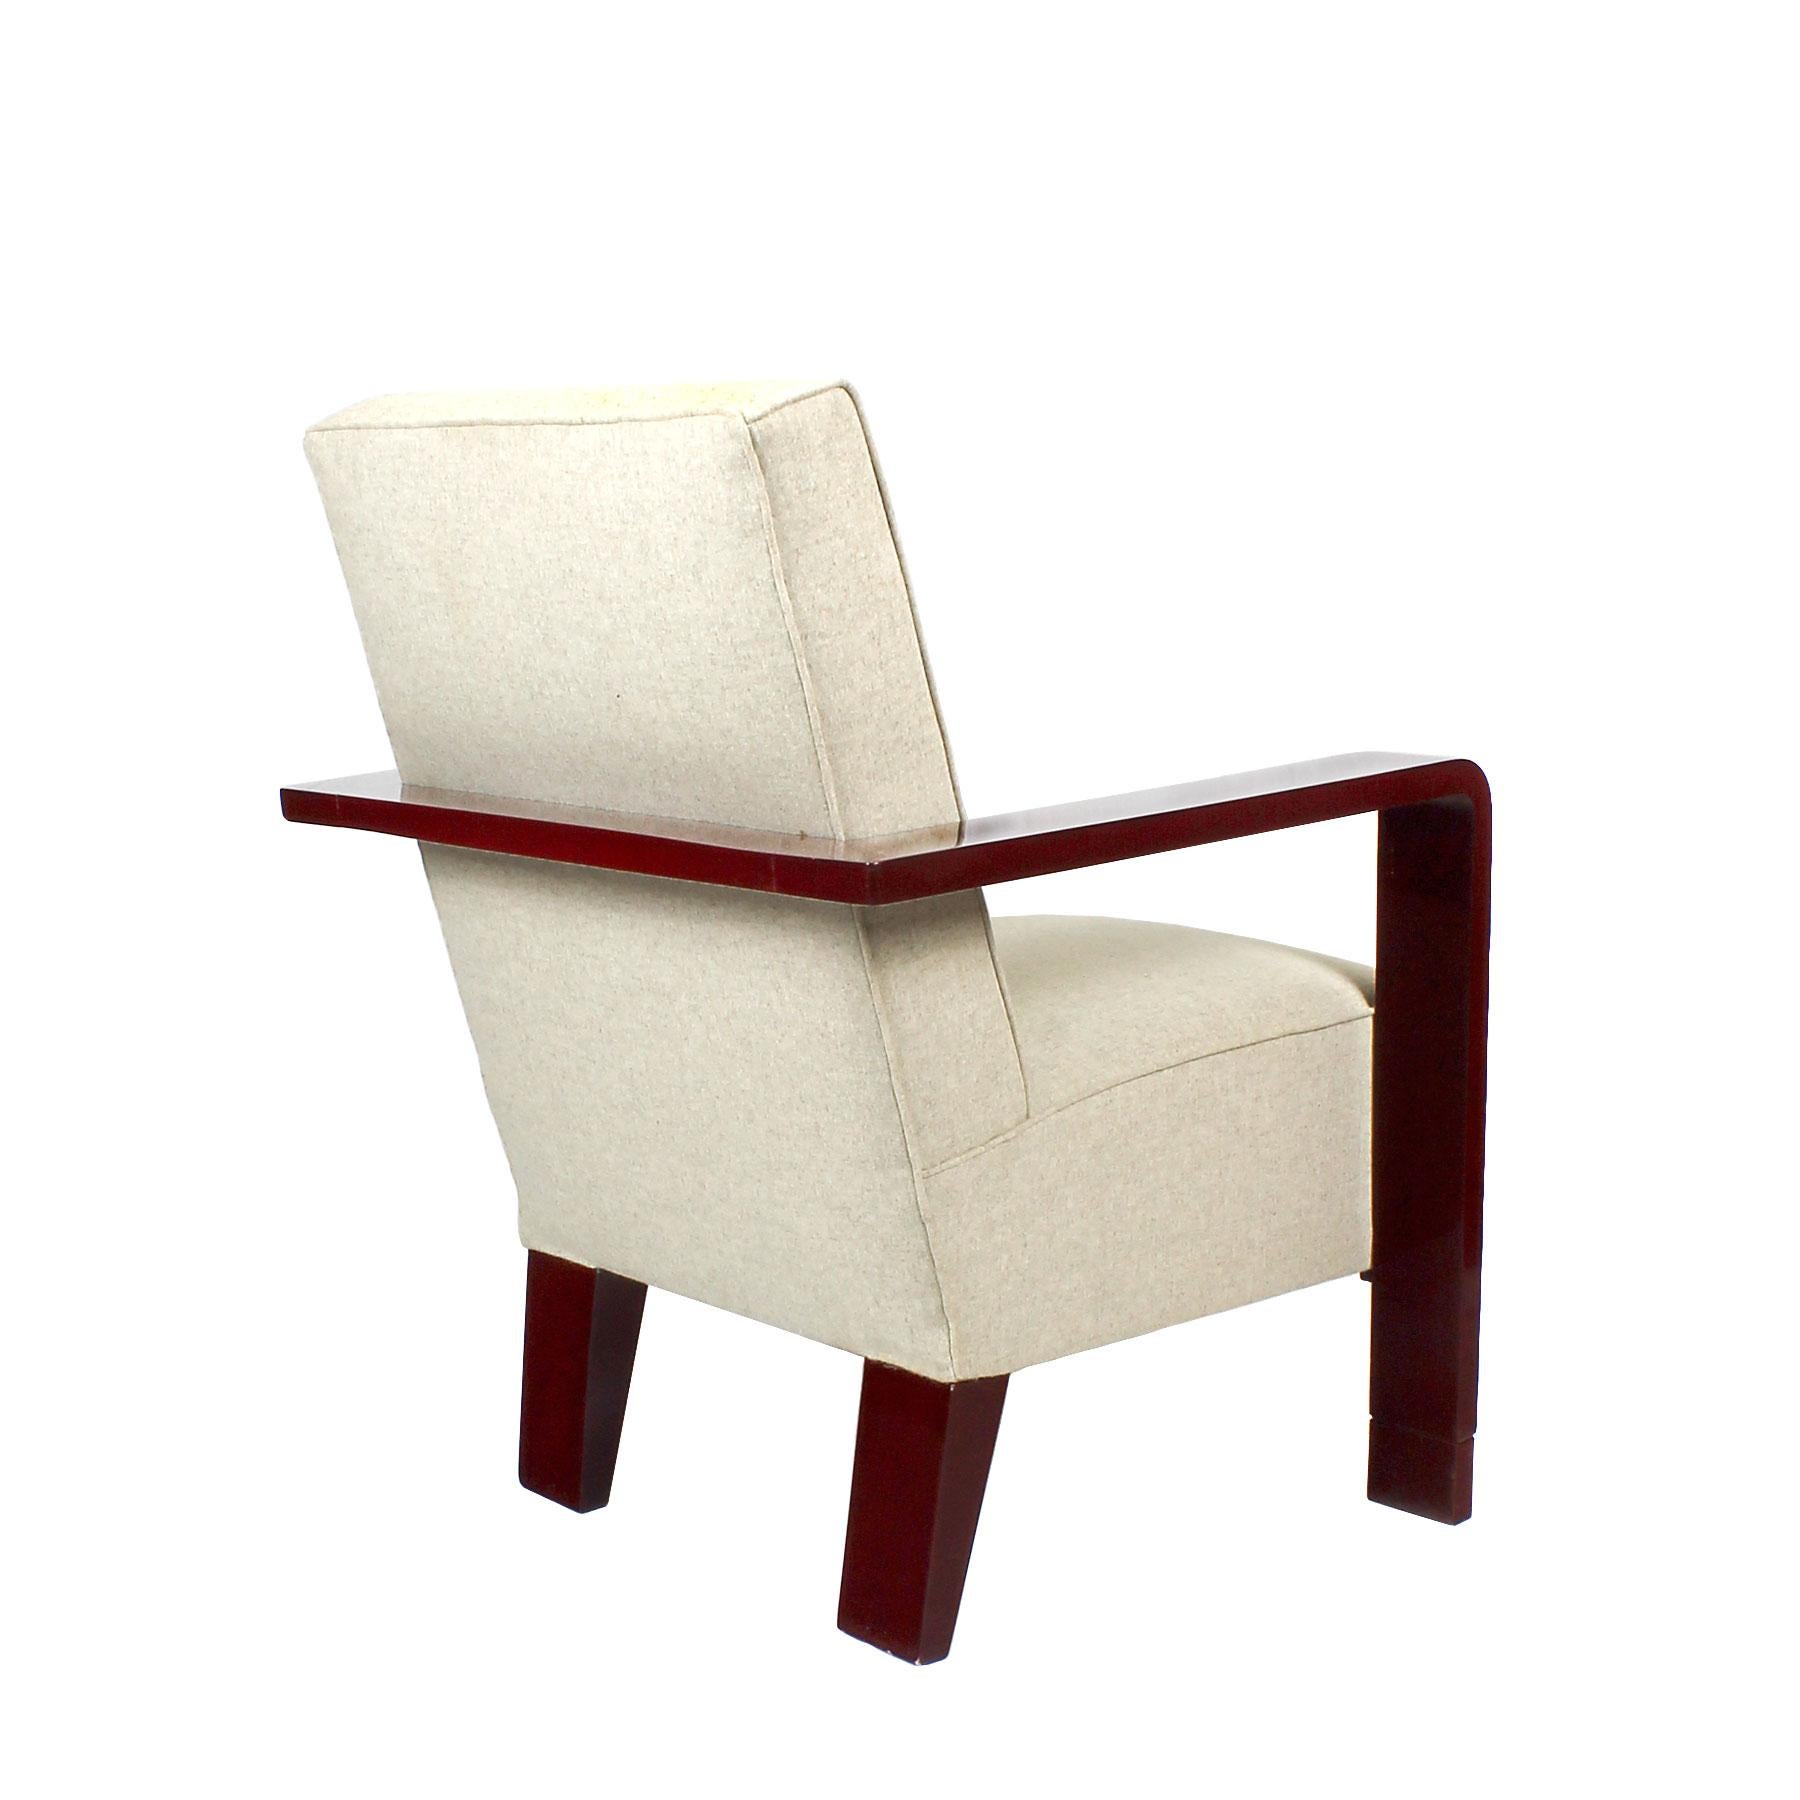 Mid-20th Century 1930s Art Deco Armchair, Lacquered Beech, Off-White Wool - Belgium For Sale